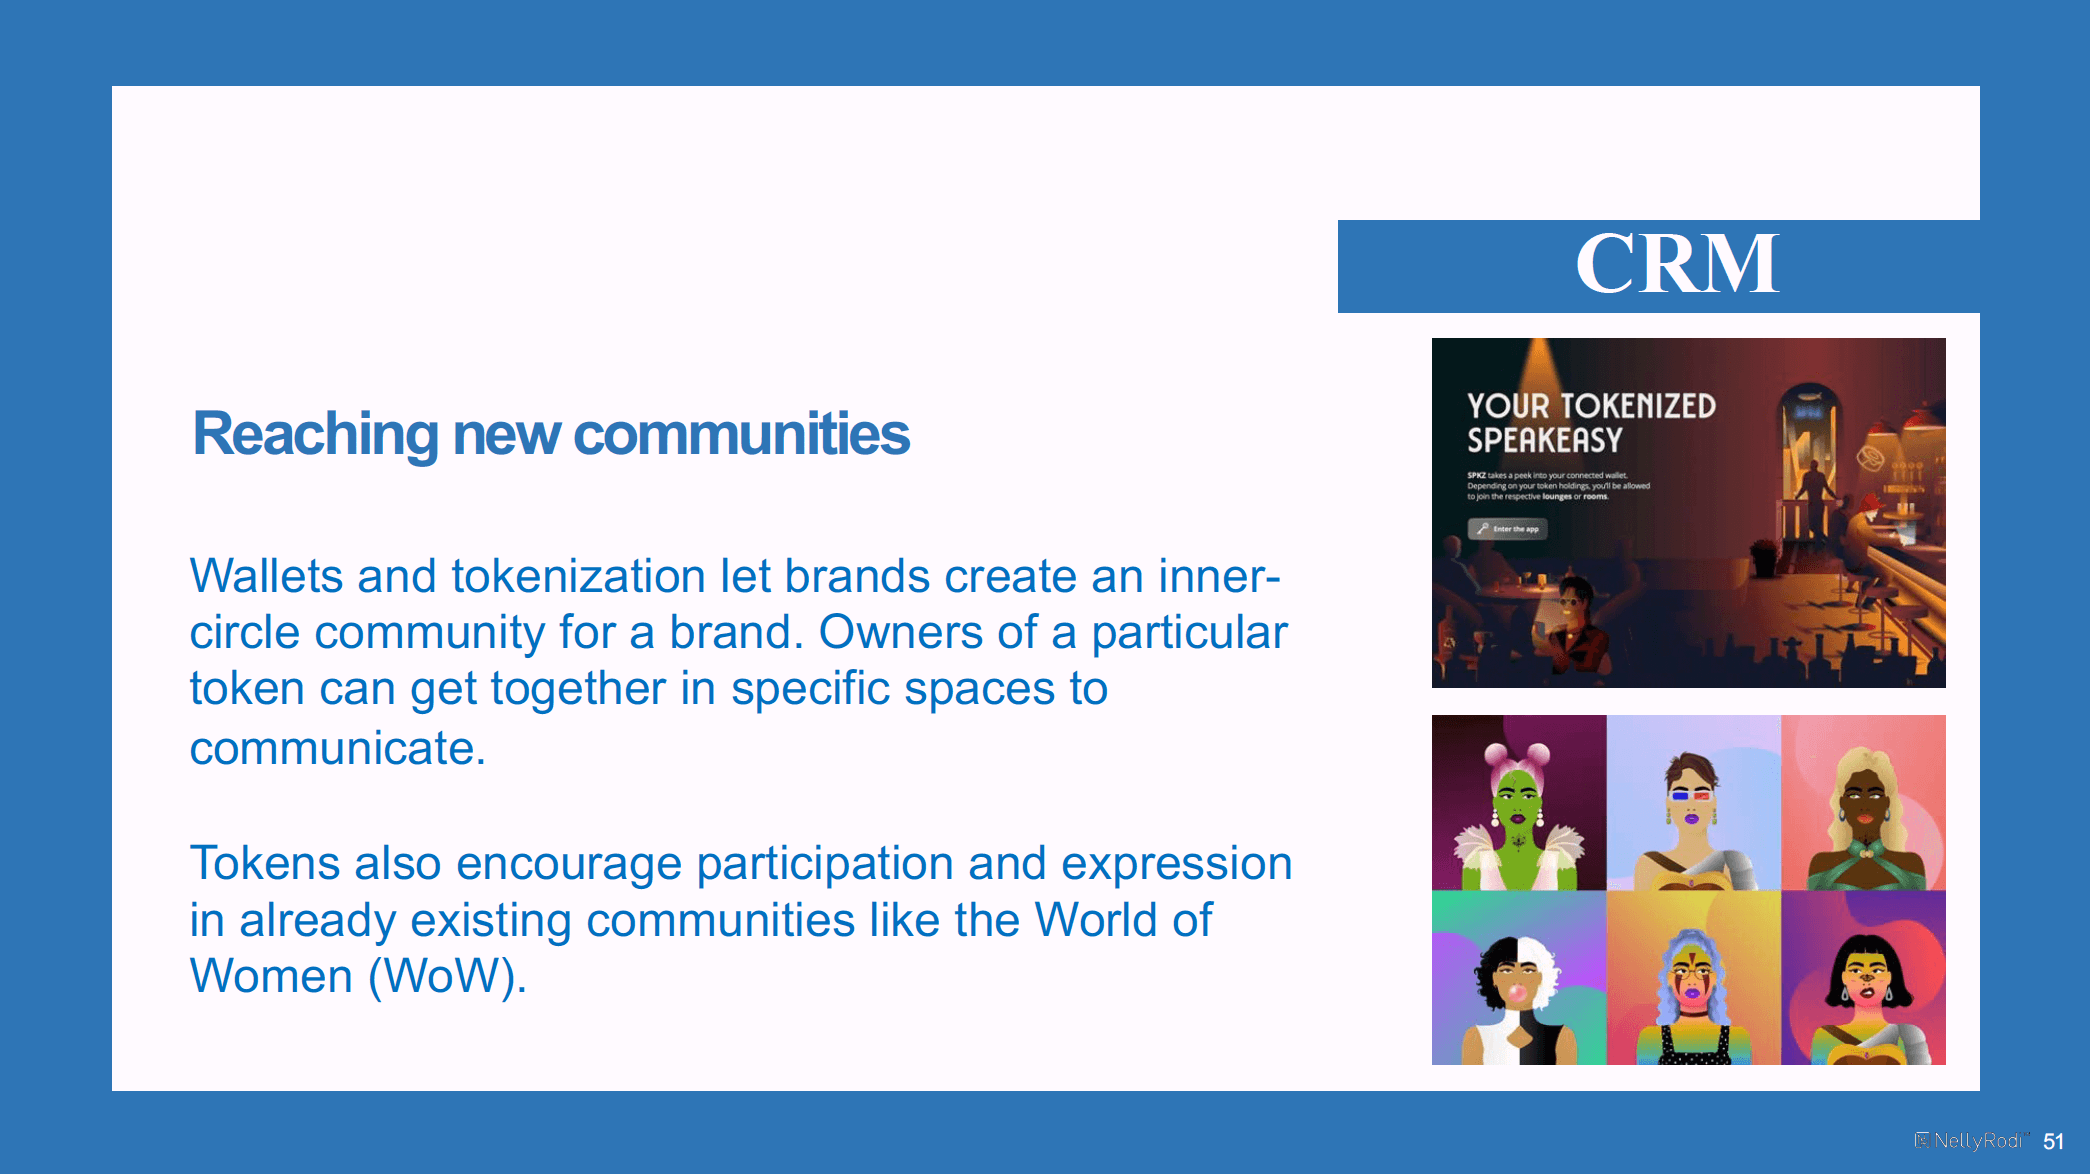 Wallets and tokenization let brands create an innercircle community for a brand.